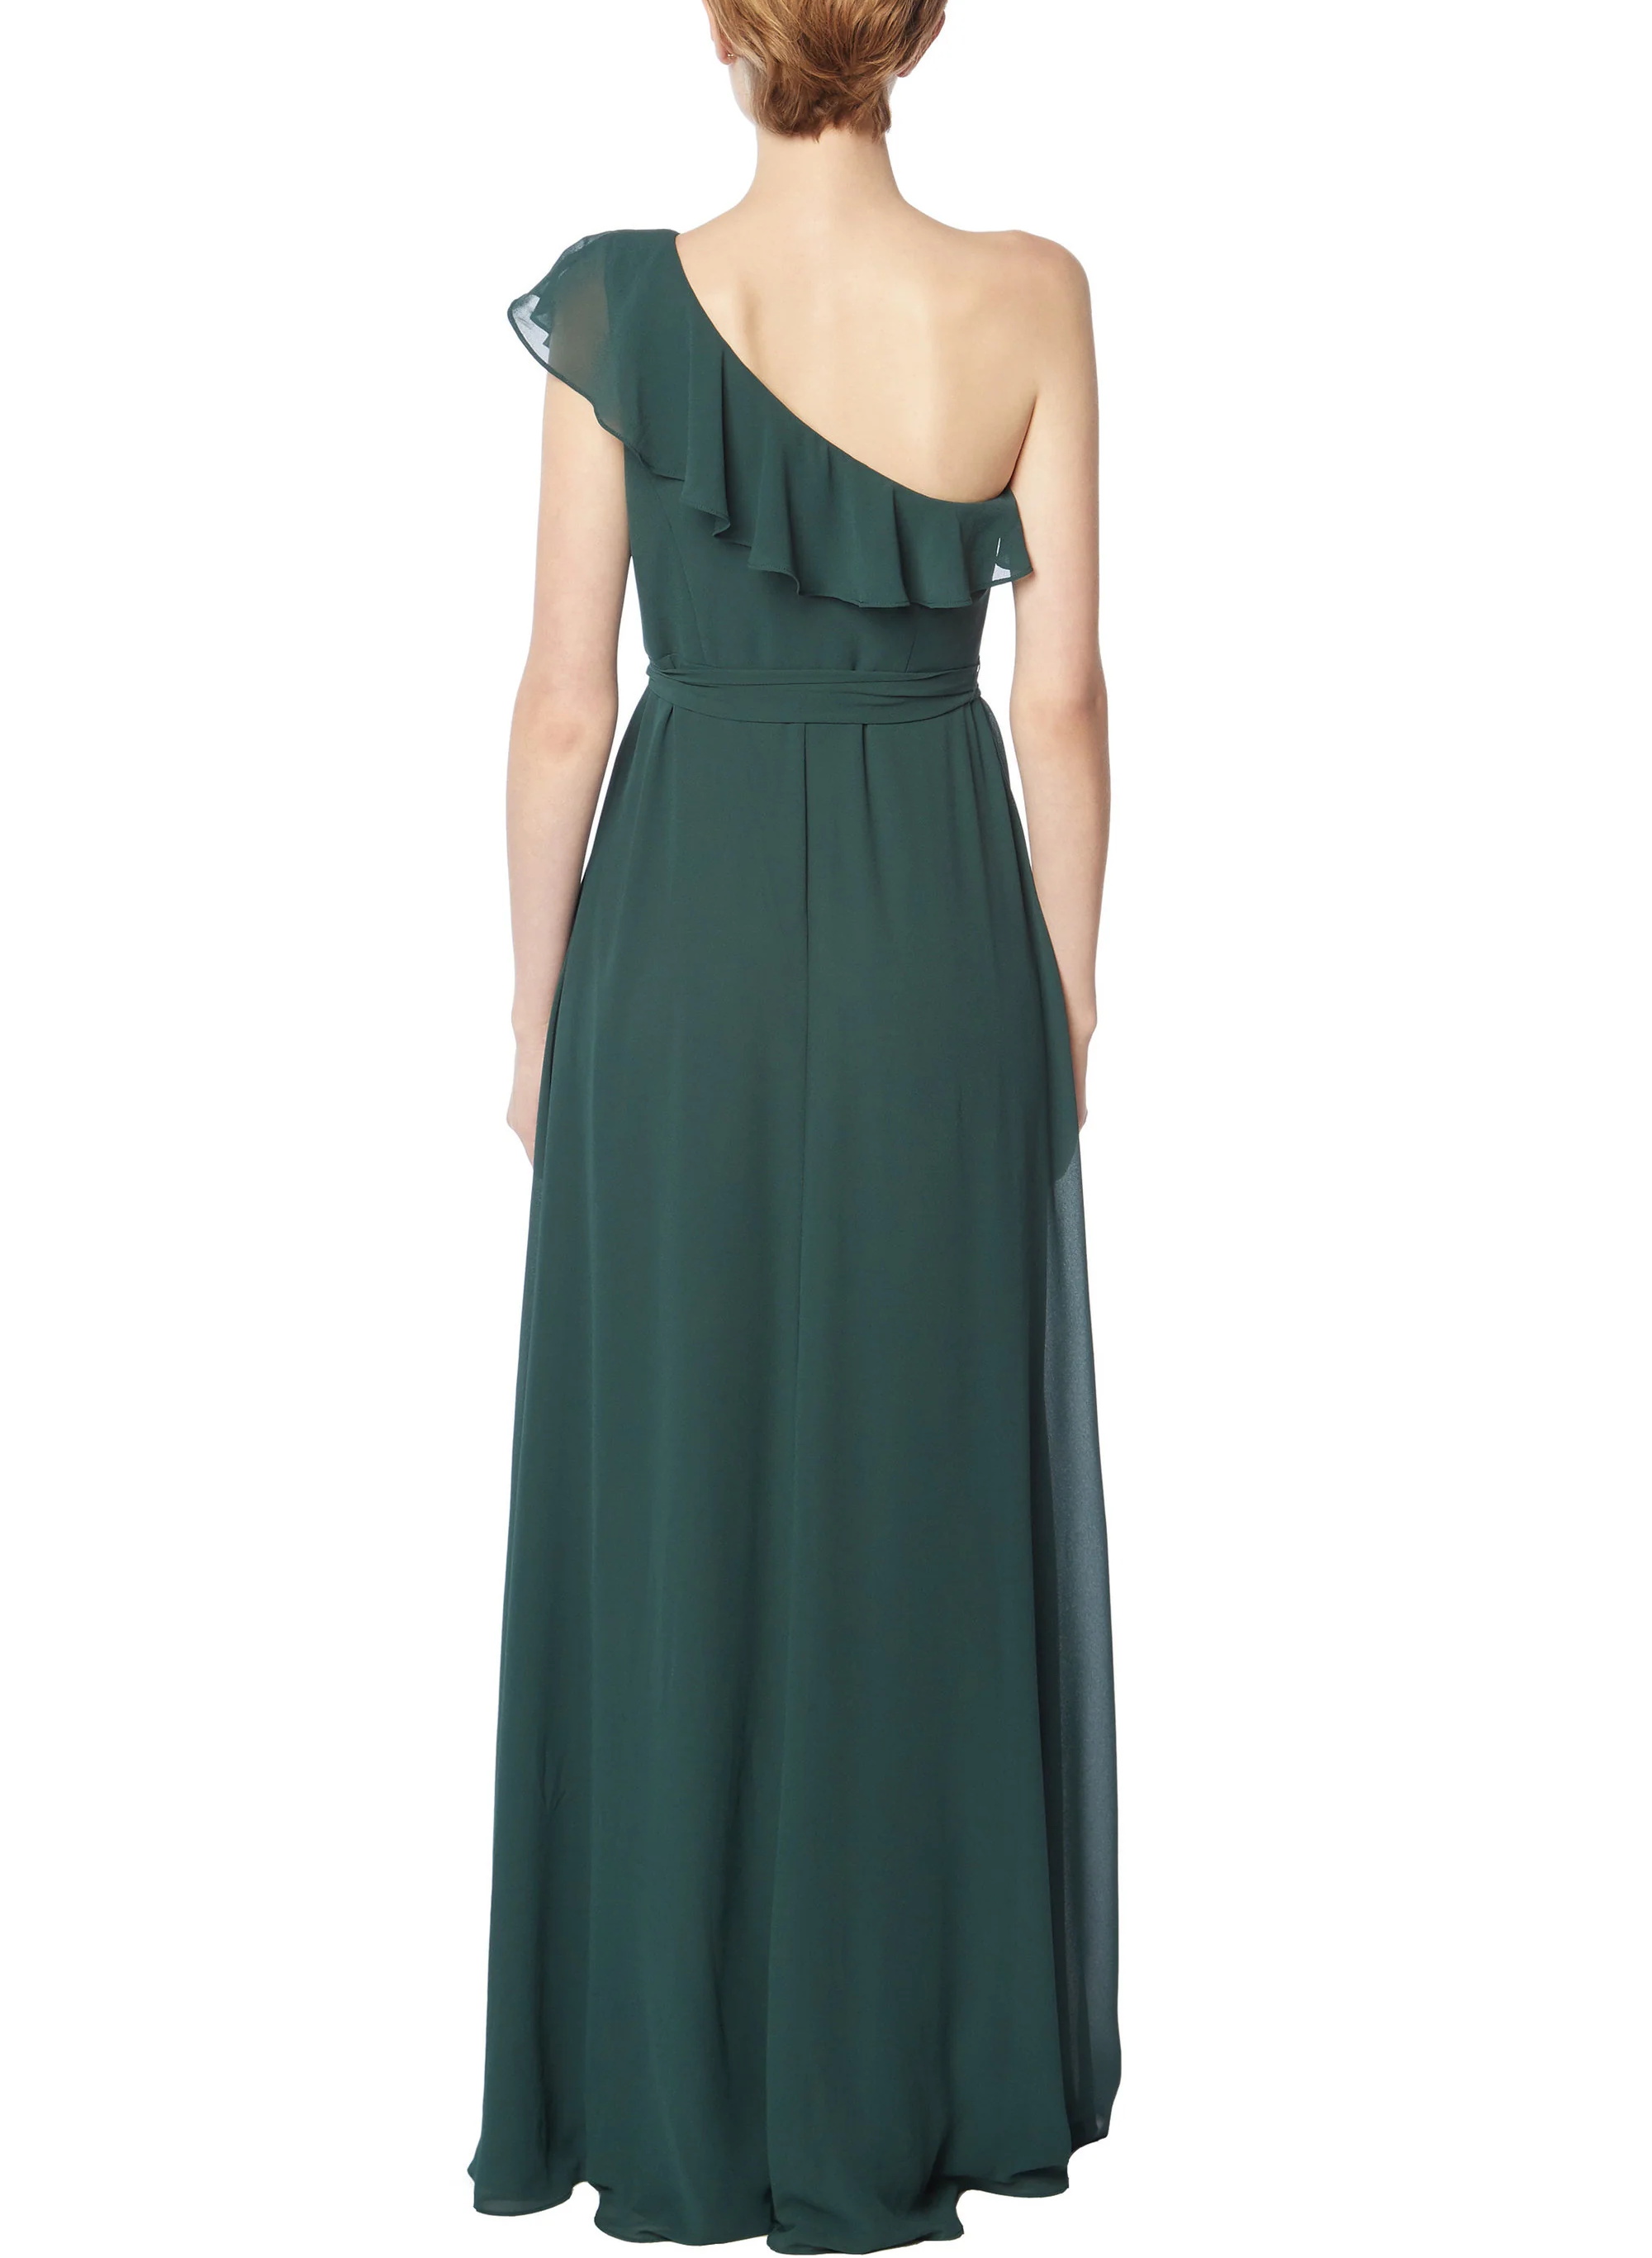 One-Shoulder Green Chiffon A-Line Bridesmaid Dresses With Cascading Ruffles